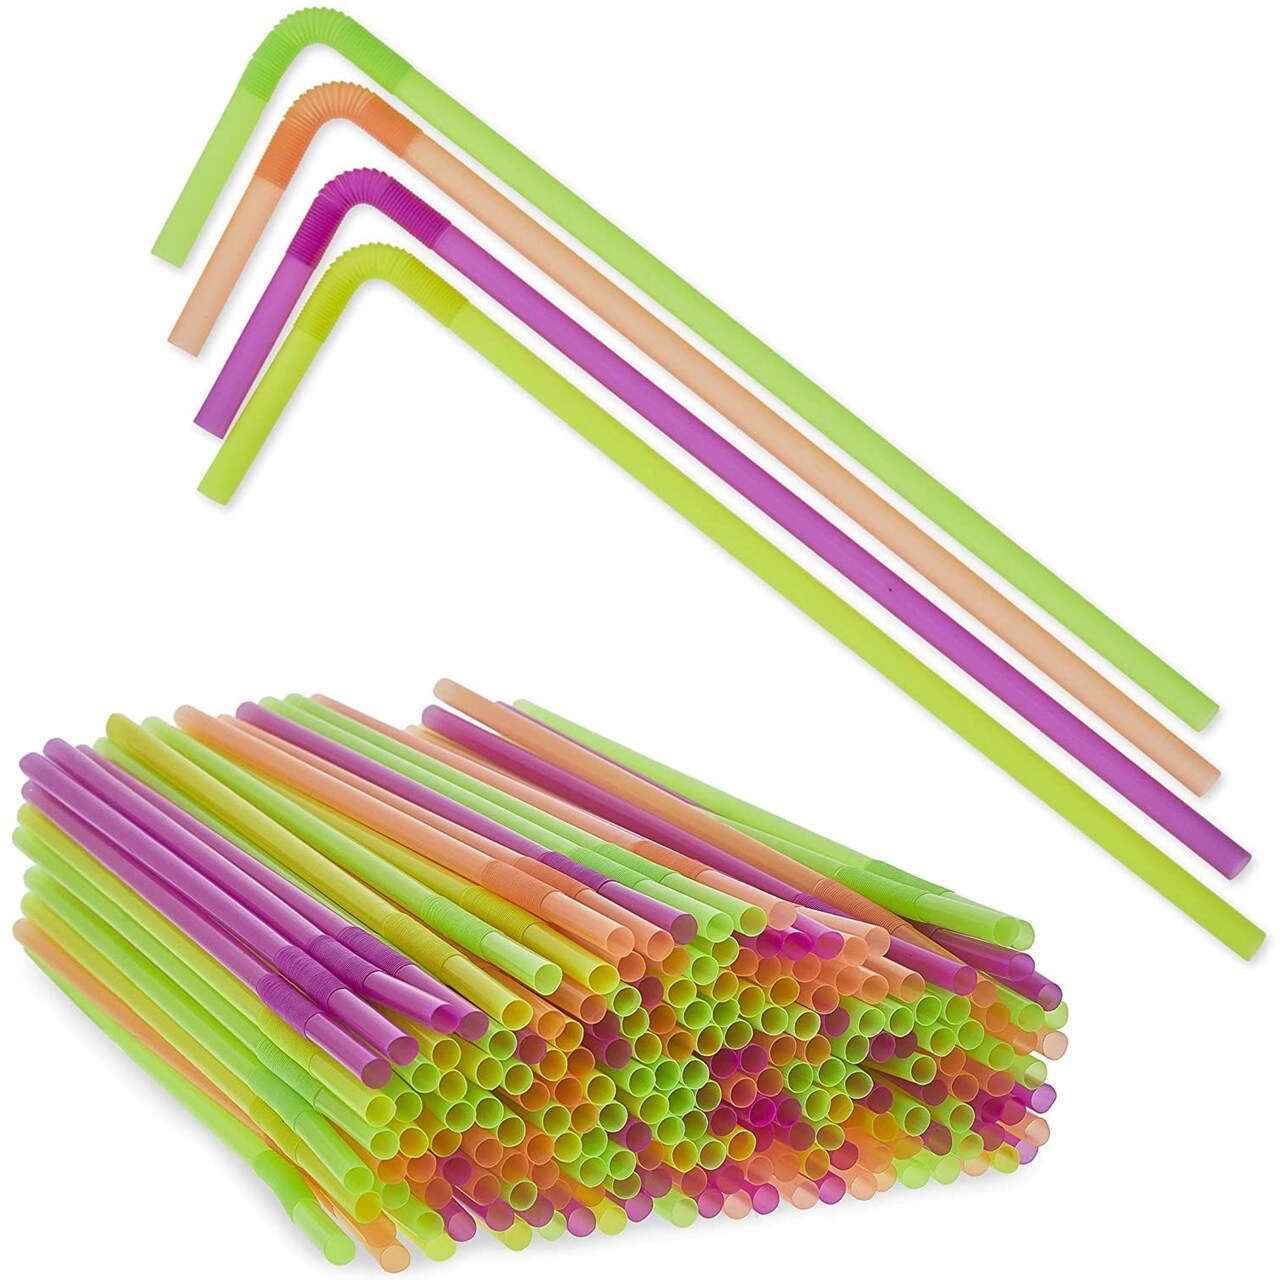 200 PCS Extended Straws Plastic,13 inch Straws,BPA-Free Drinking Straw,  Flexible Reusable Straws, Bendy Fancy Straws, Party Decorations 